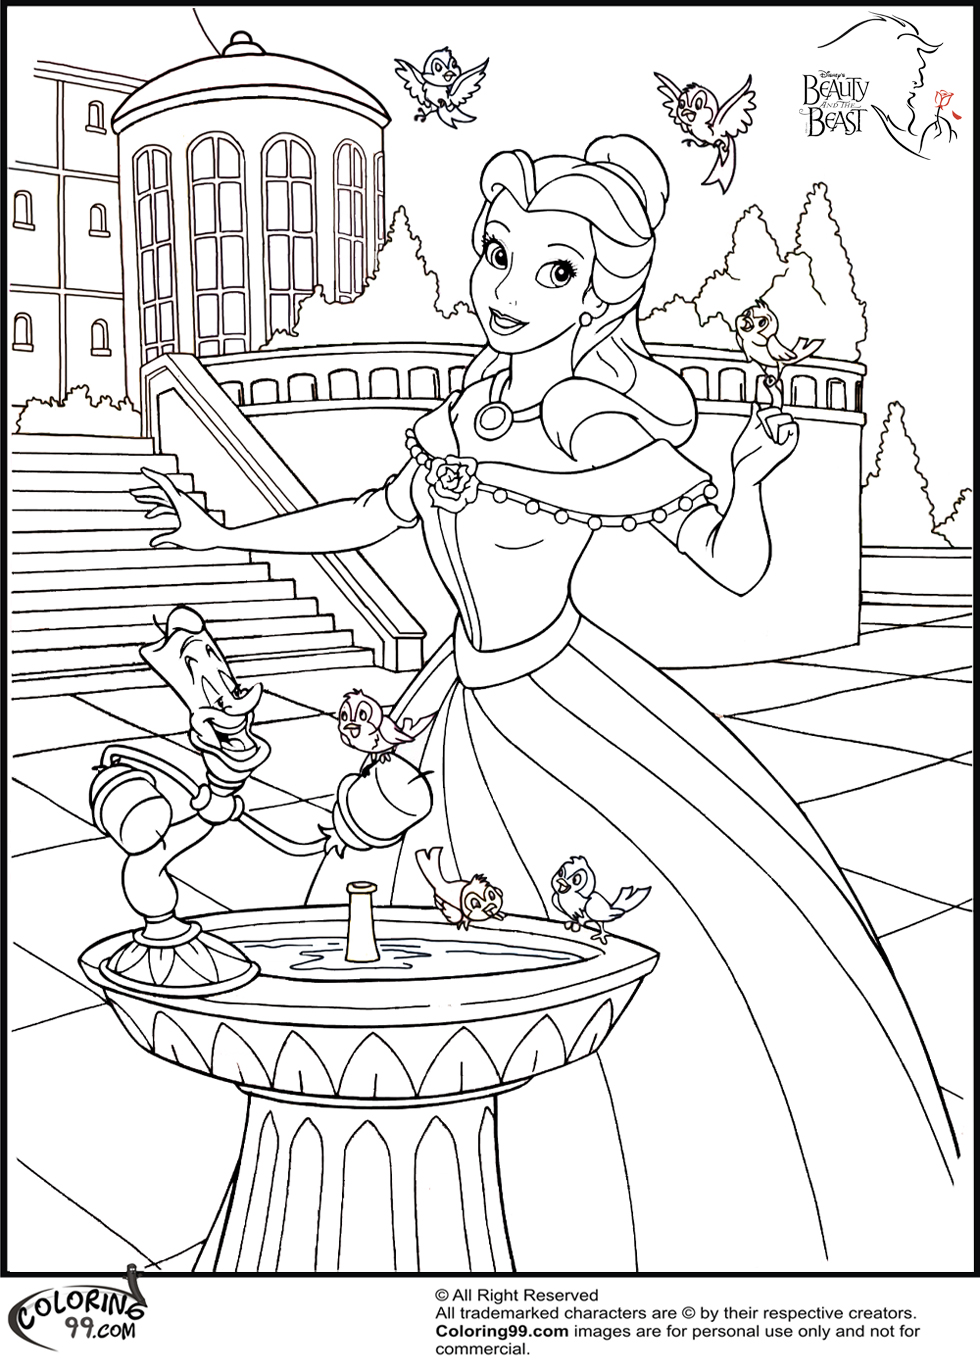 Download Disney Princess Belle Coloring Pages | Minister Coloring